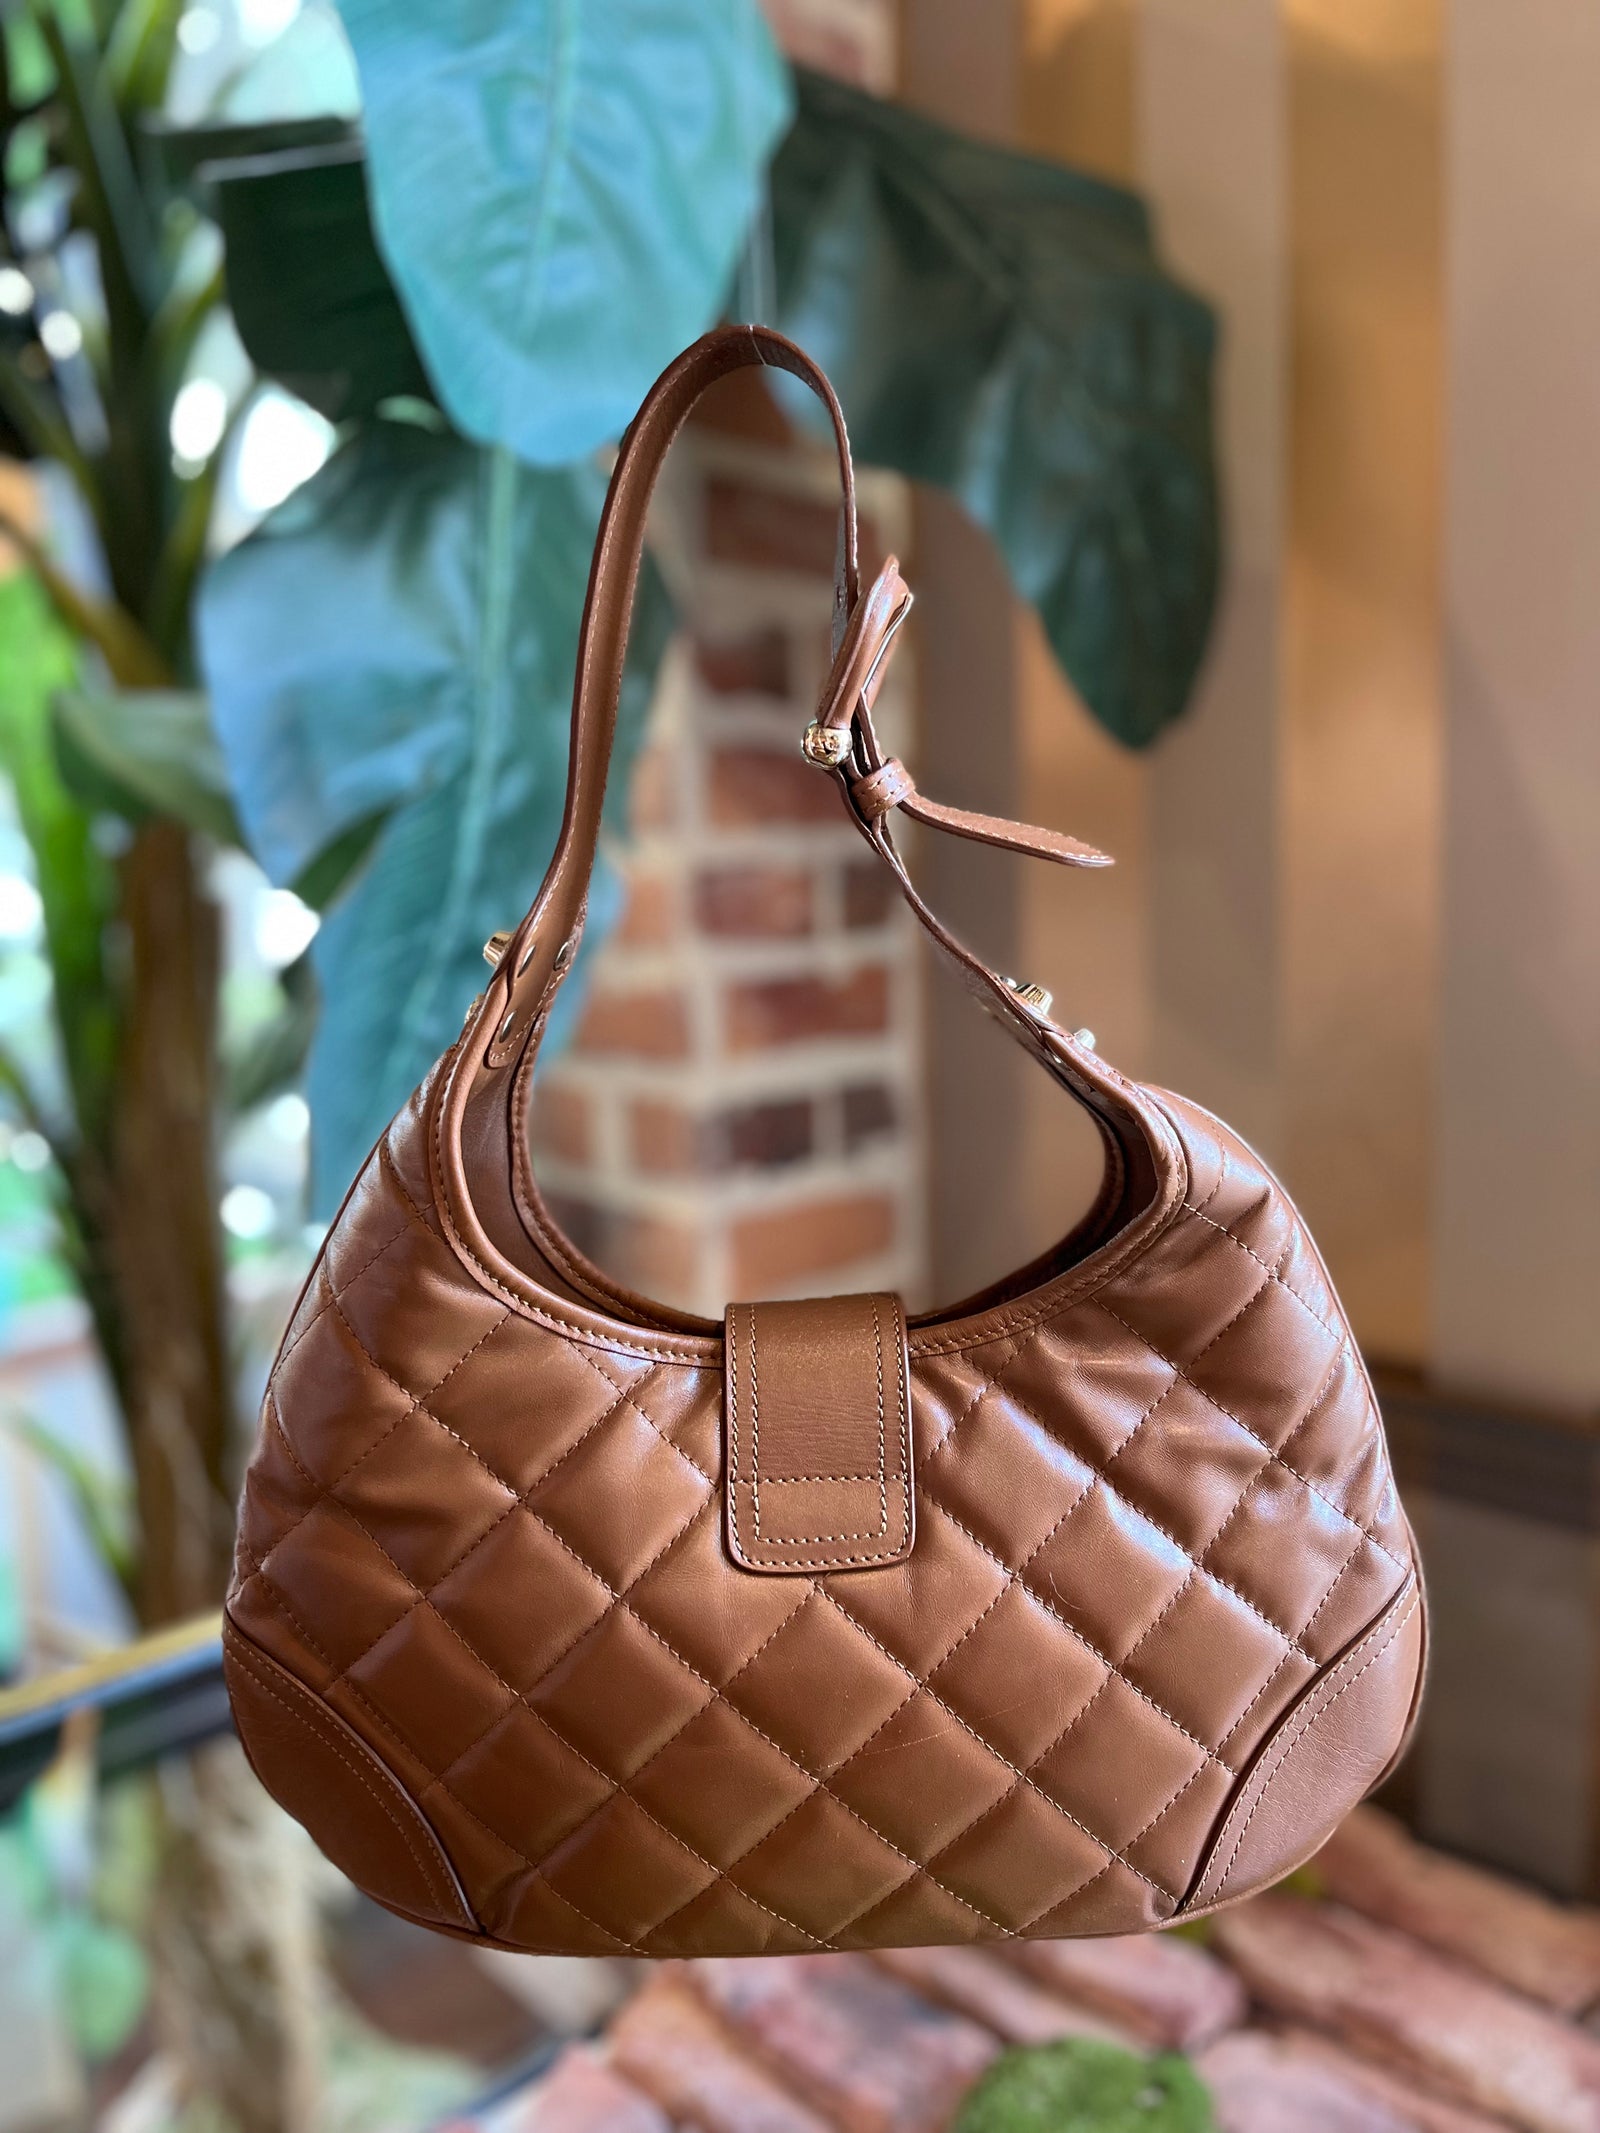 Authentic Burberry Bags, Shoes, and Accessories - The Purse Ladies